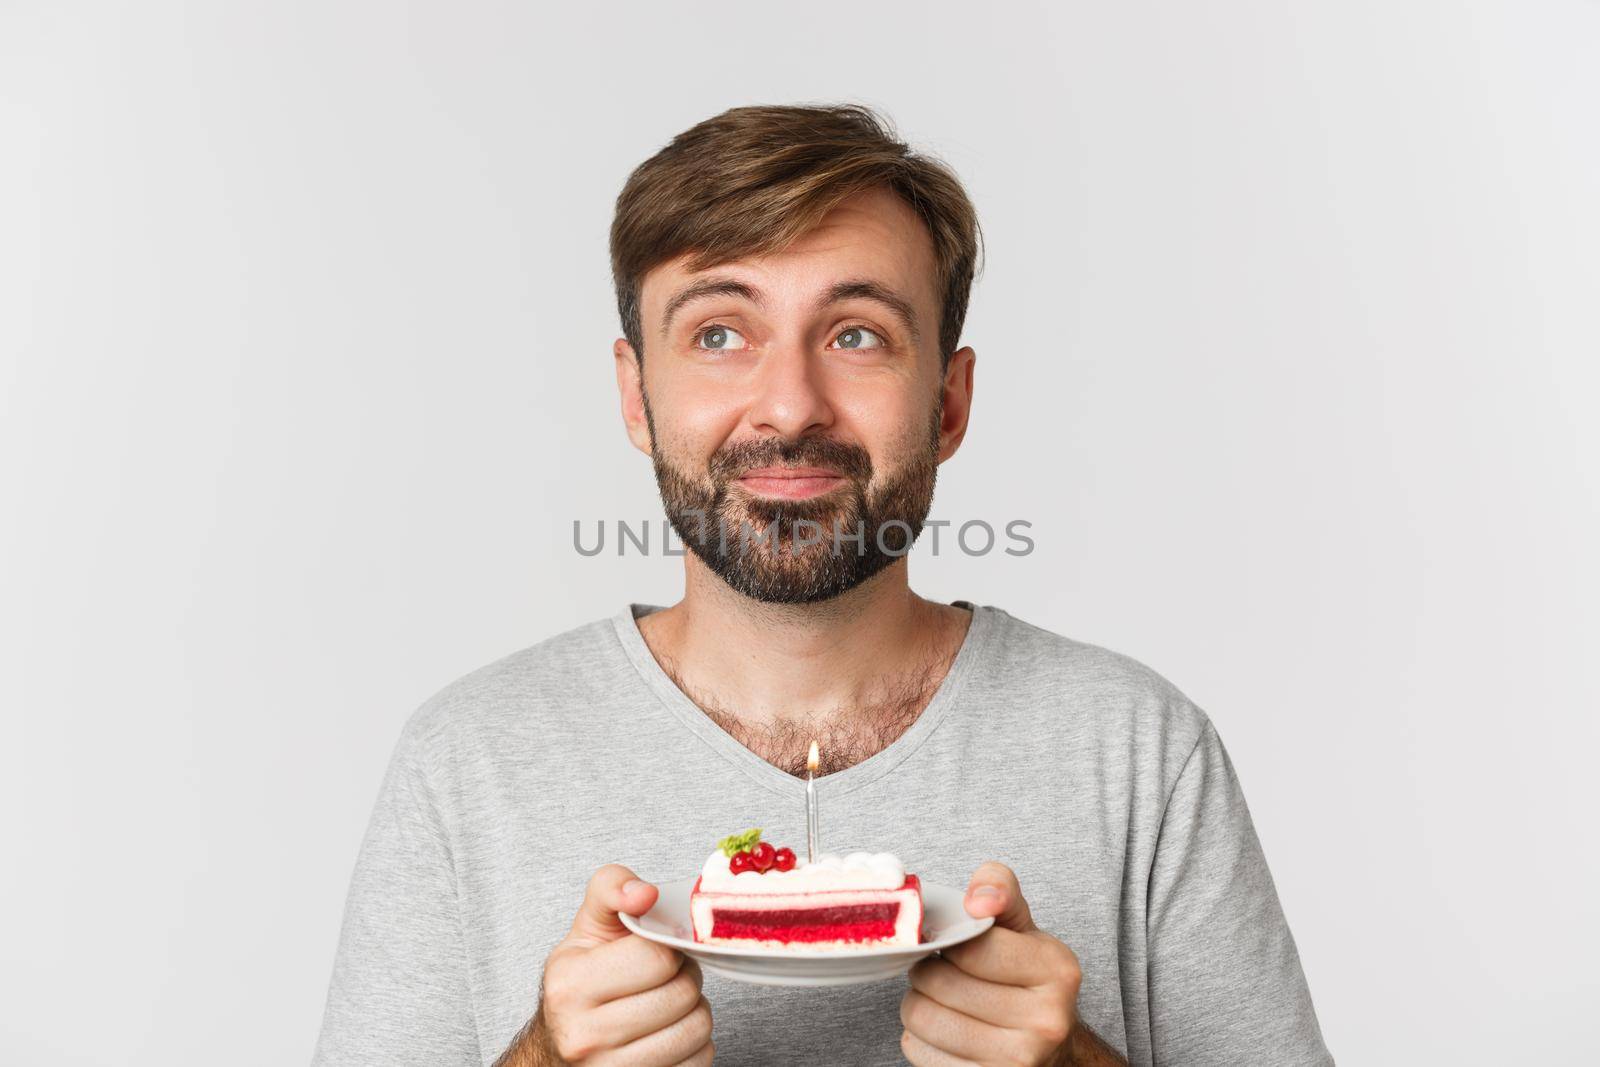 Close-up of dreamy bearded man, smiling and celebrating birthday, holding cake with lit candle, making b-day wish, standing over white background.